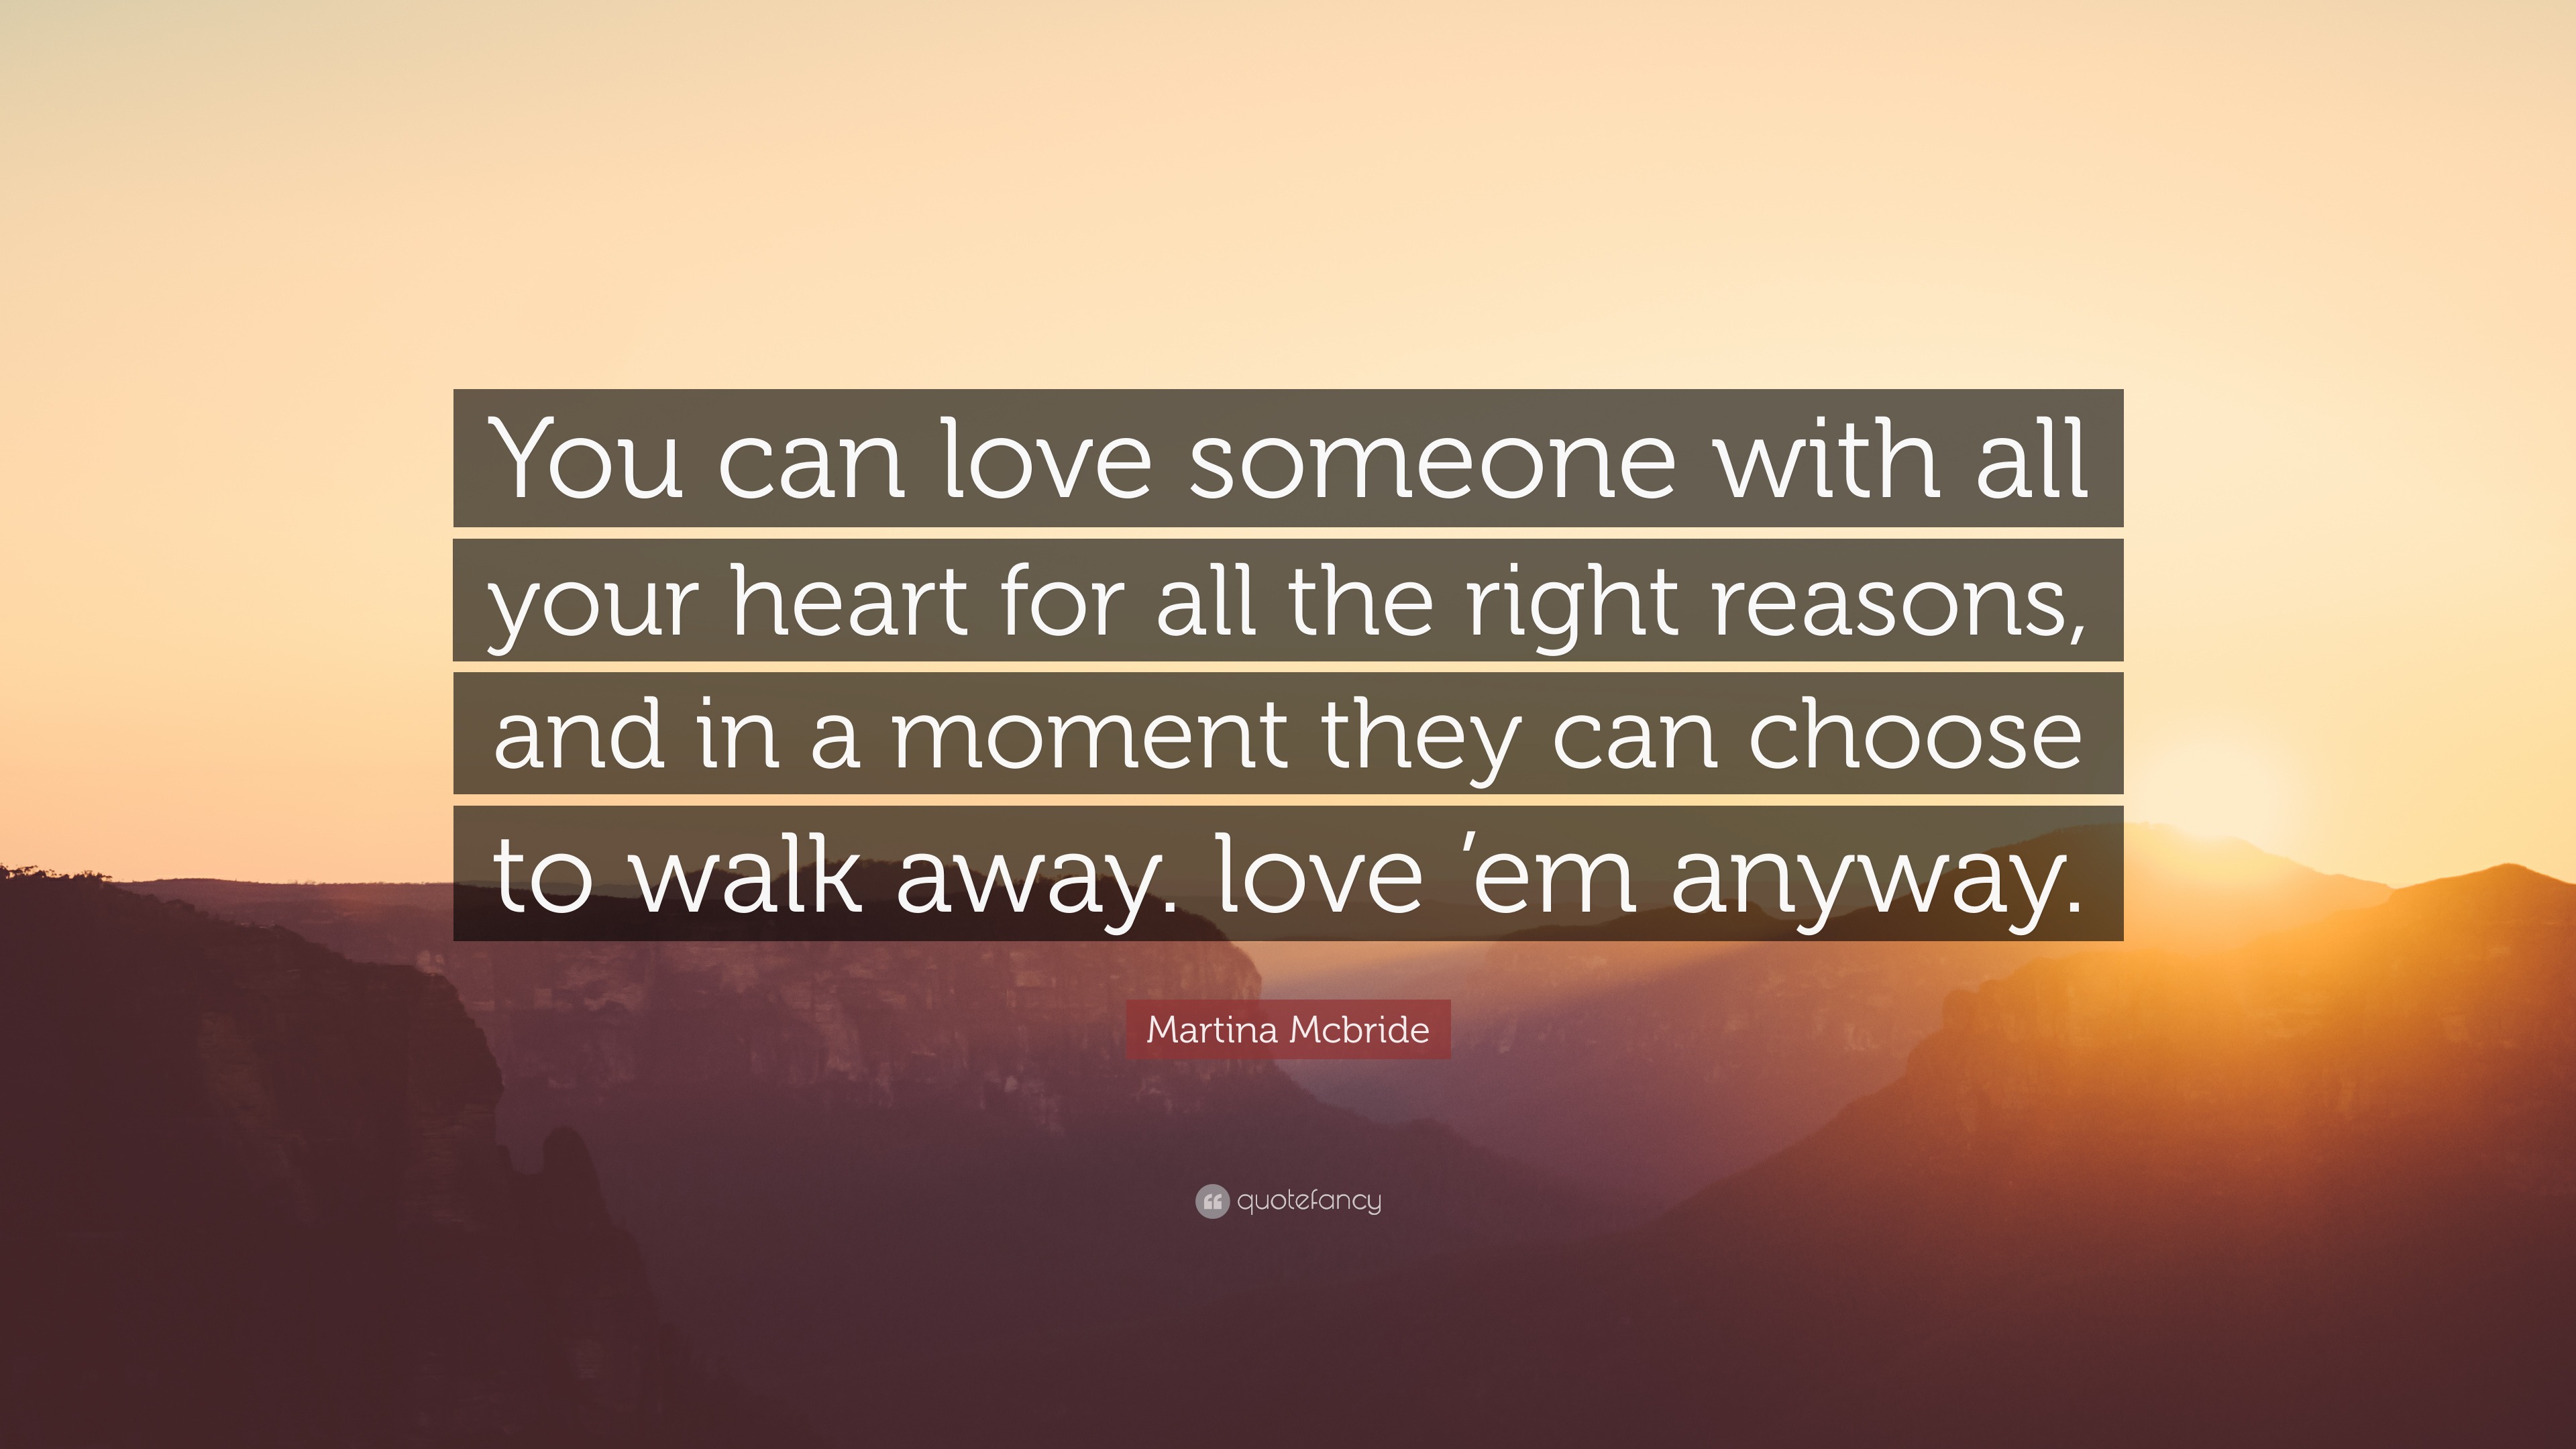 Martina Mcbride Quote “You can love someone with all your heart for all the